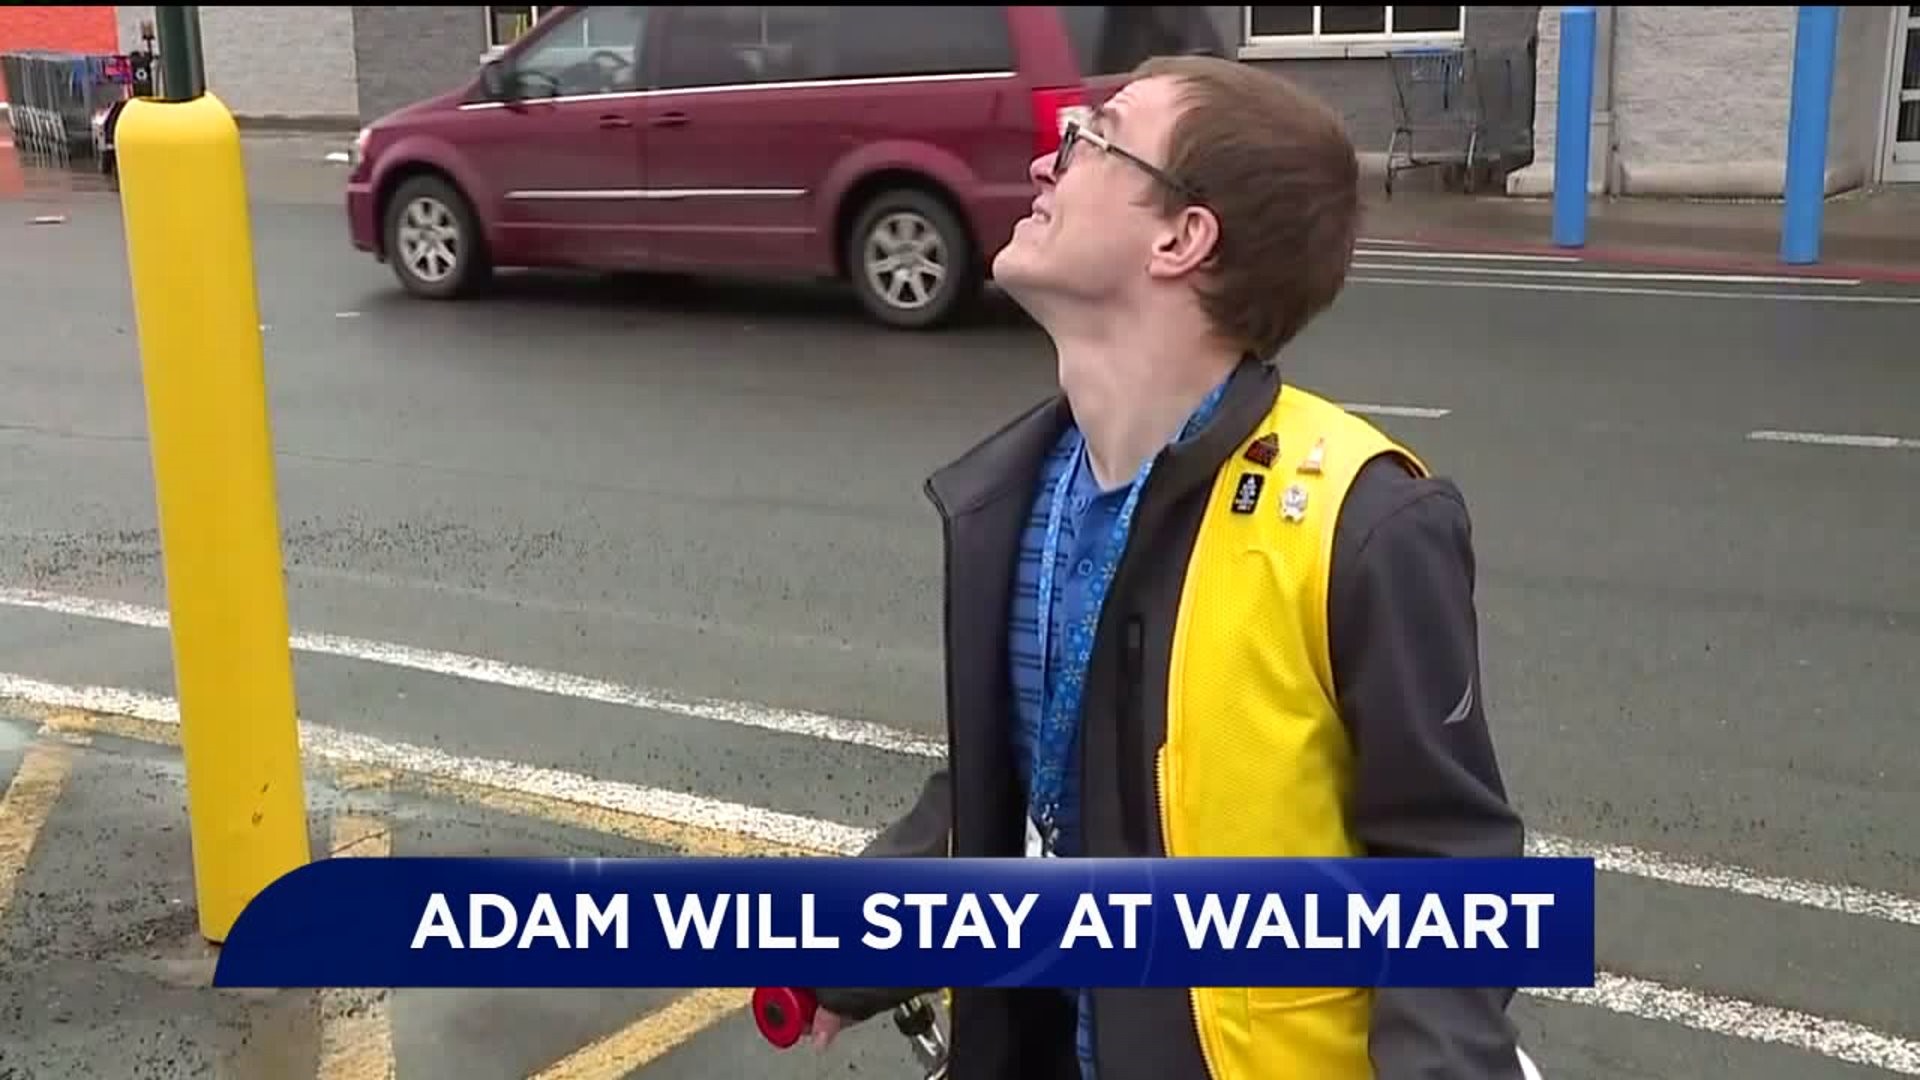 Snyder County Walmart Greeter Offered New Position